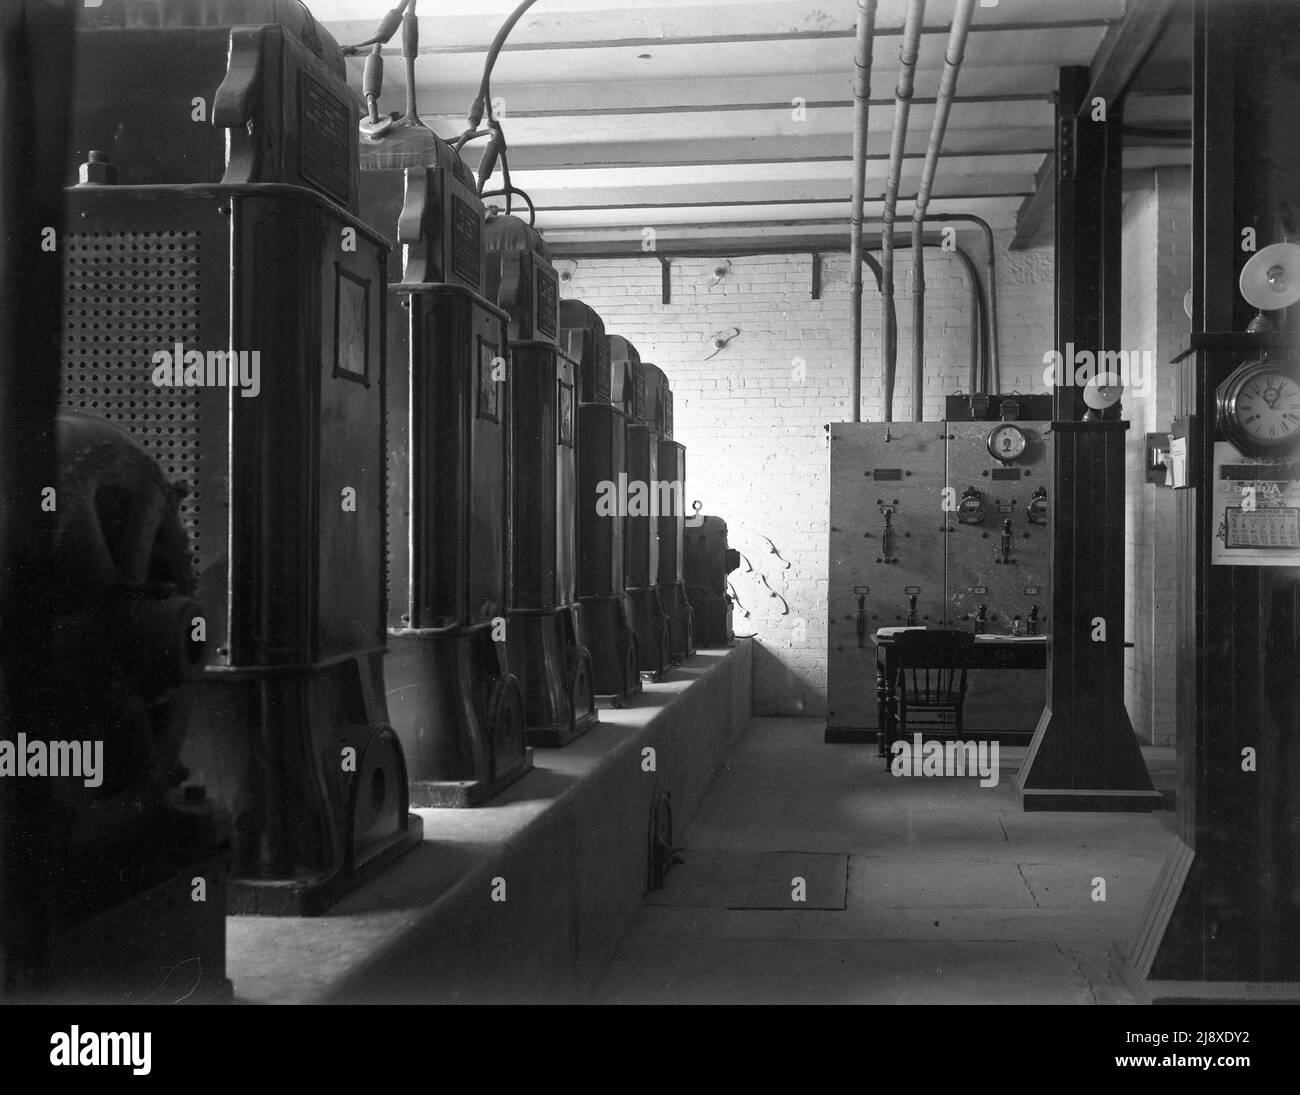 Early 1900s Substation High Resolution Stock Photography and Images - Alamy